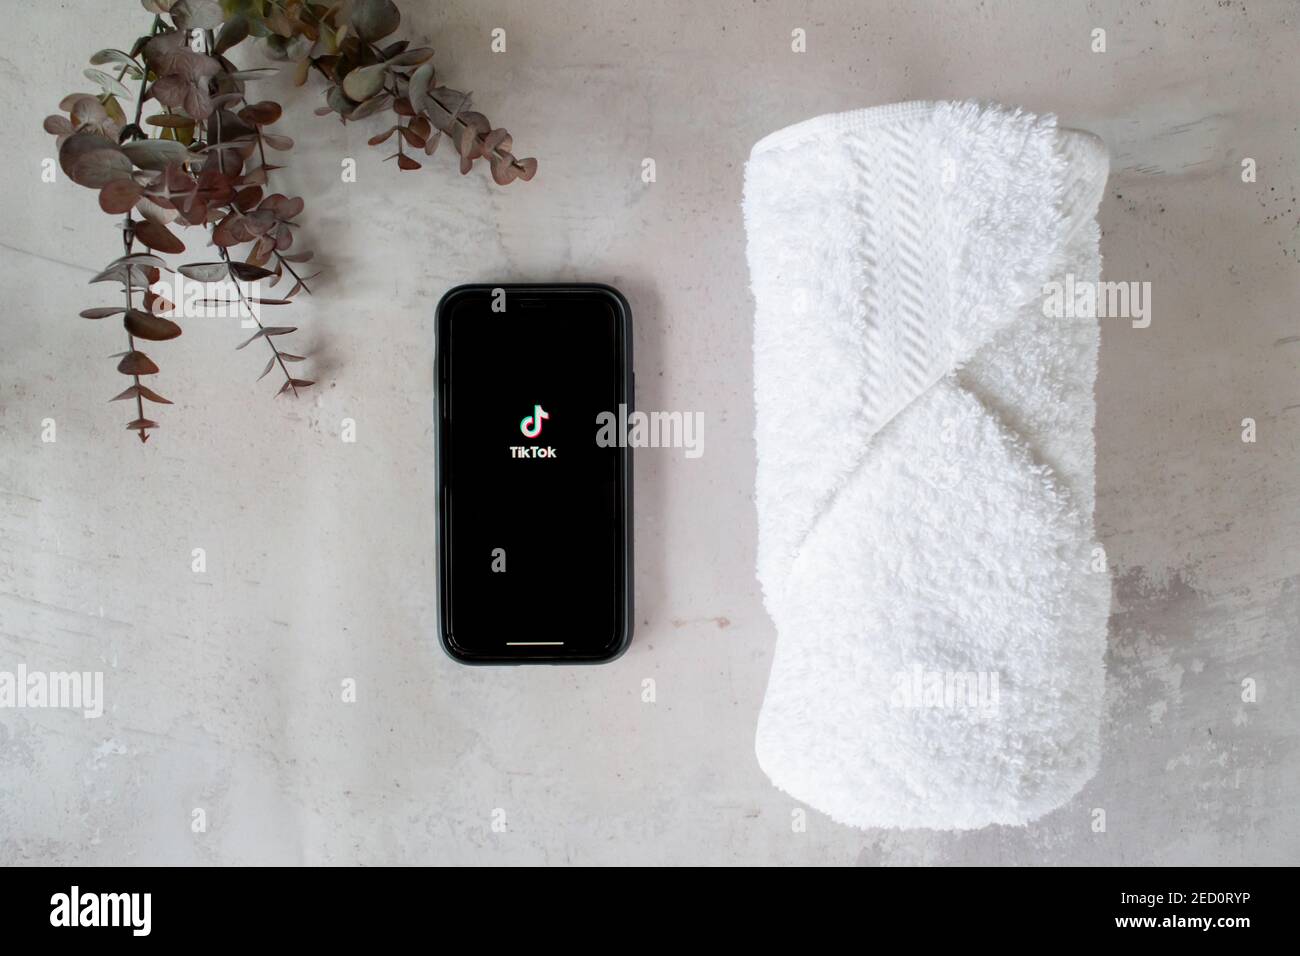 London, United Kingdom - February 14, 2021: iPhone showing the popular social media app Tik Tok with a spa towel and eucalyptus plant. Stock Photo